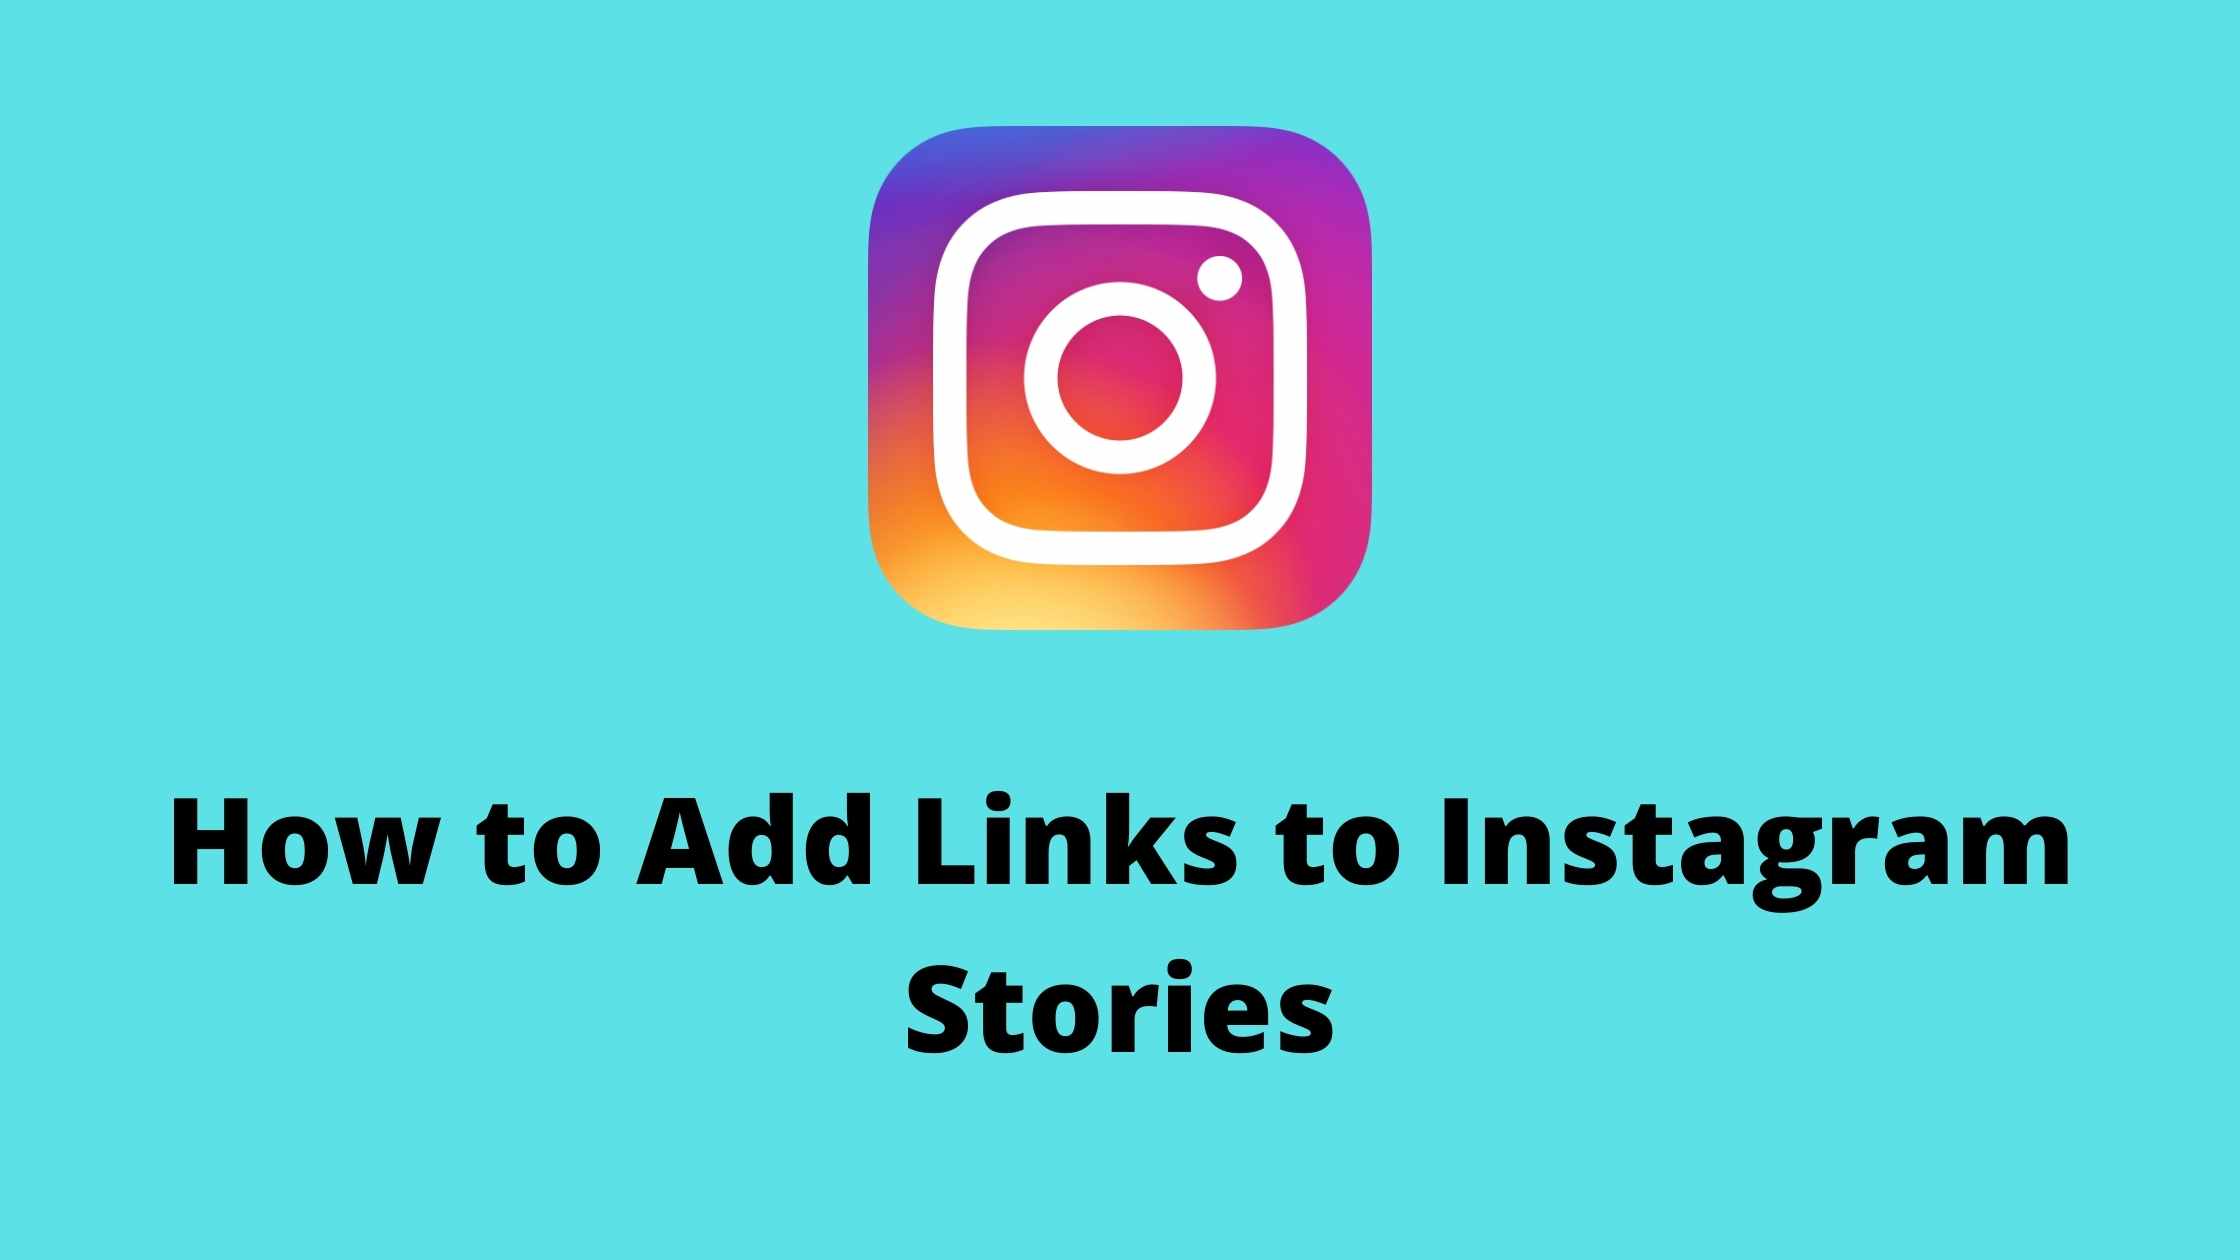 how to add links to Instagram stories